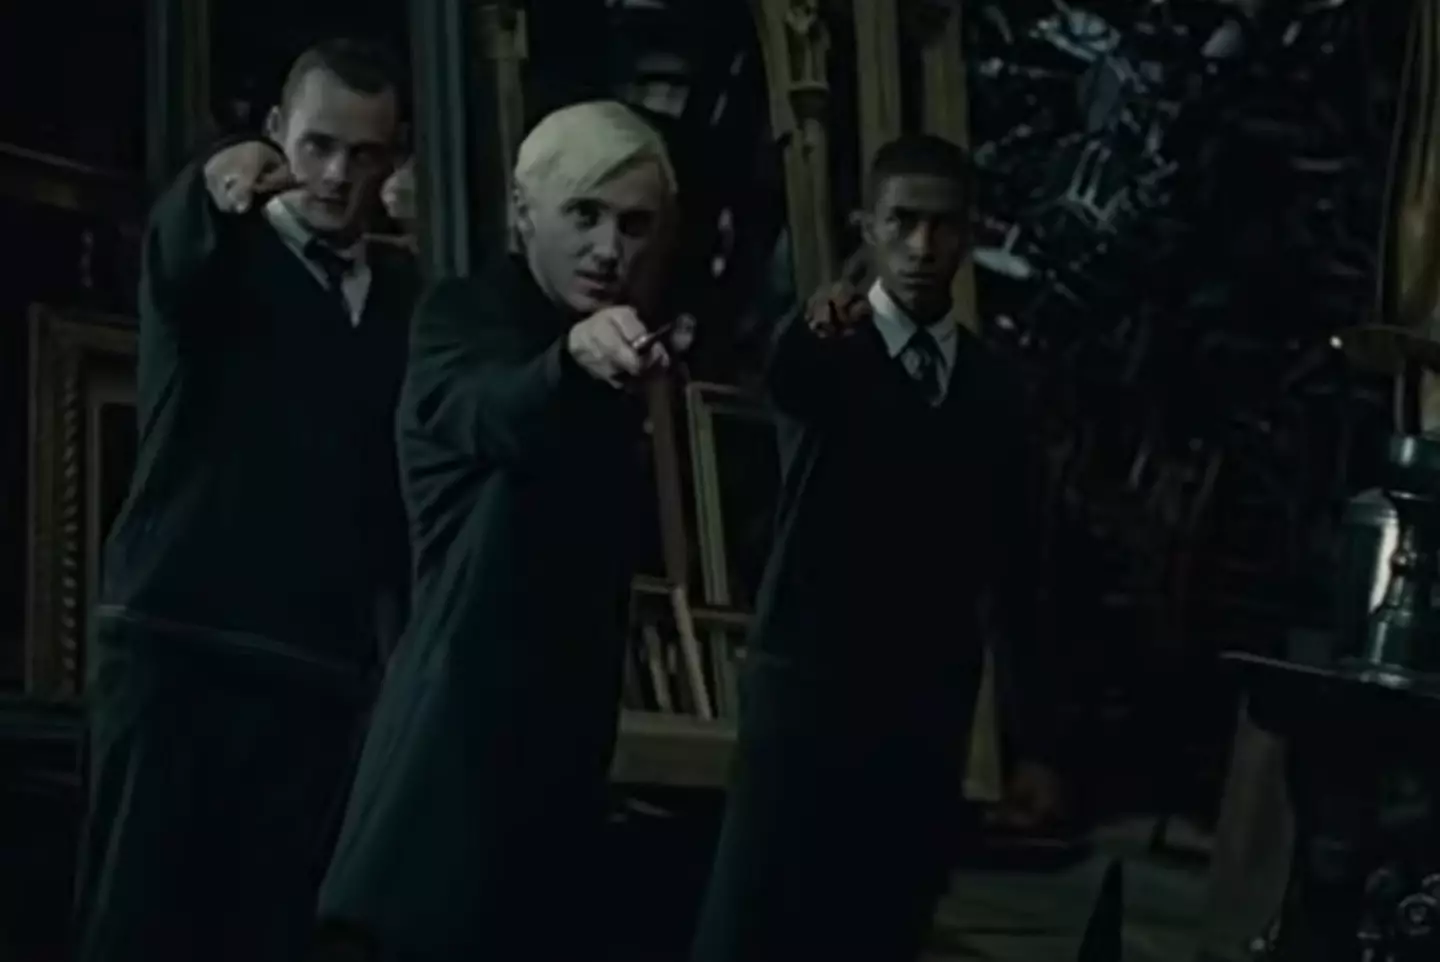 But when we next see them they're free and teaming up with Malfoy.